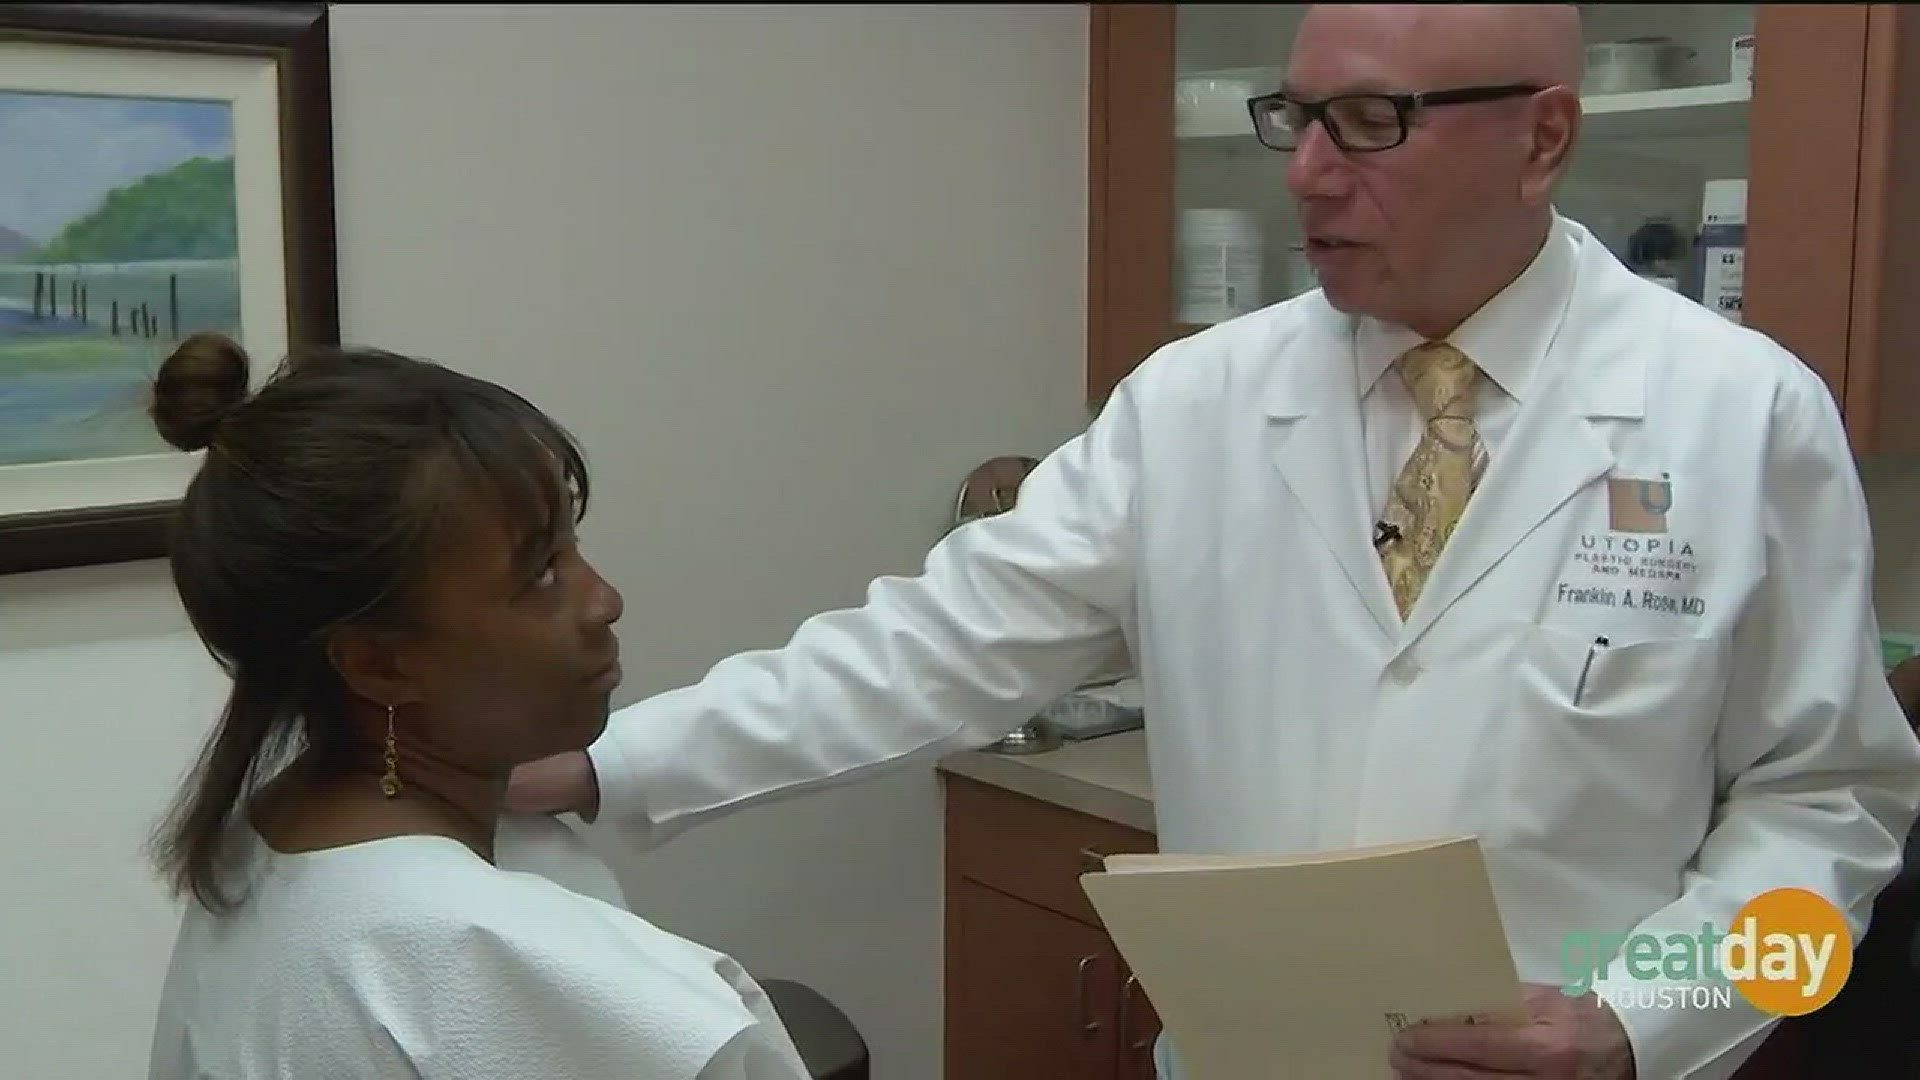 Dr. Franklin Rose with Utopia Plastic Surgery & Medspa, along with his patient Nikisha Ellis, share how she underwent one of the largest breast reduction surgeries in Texas.